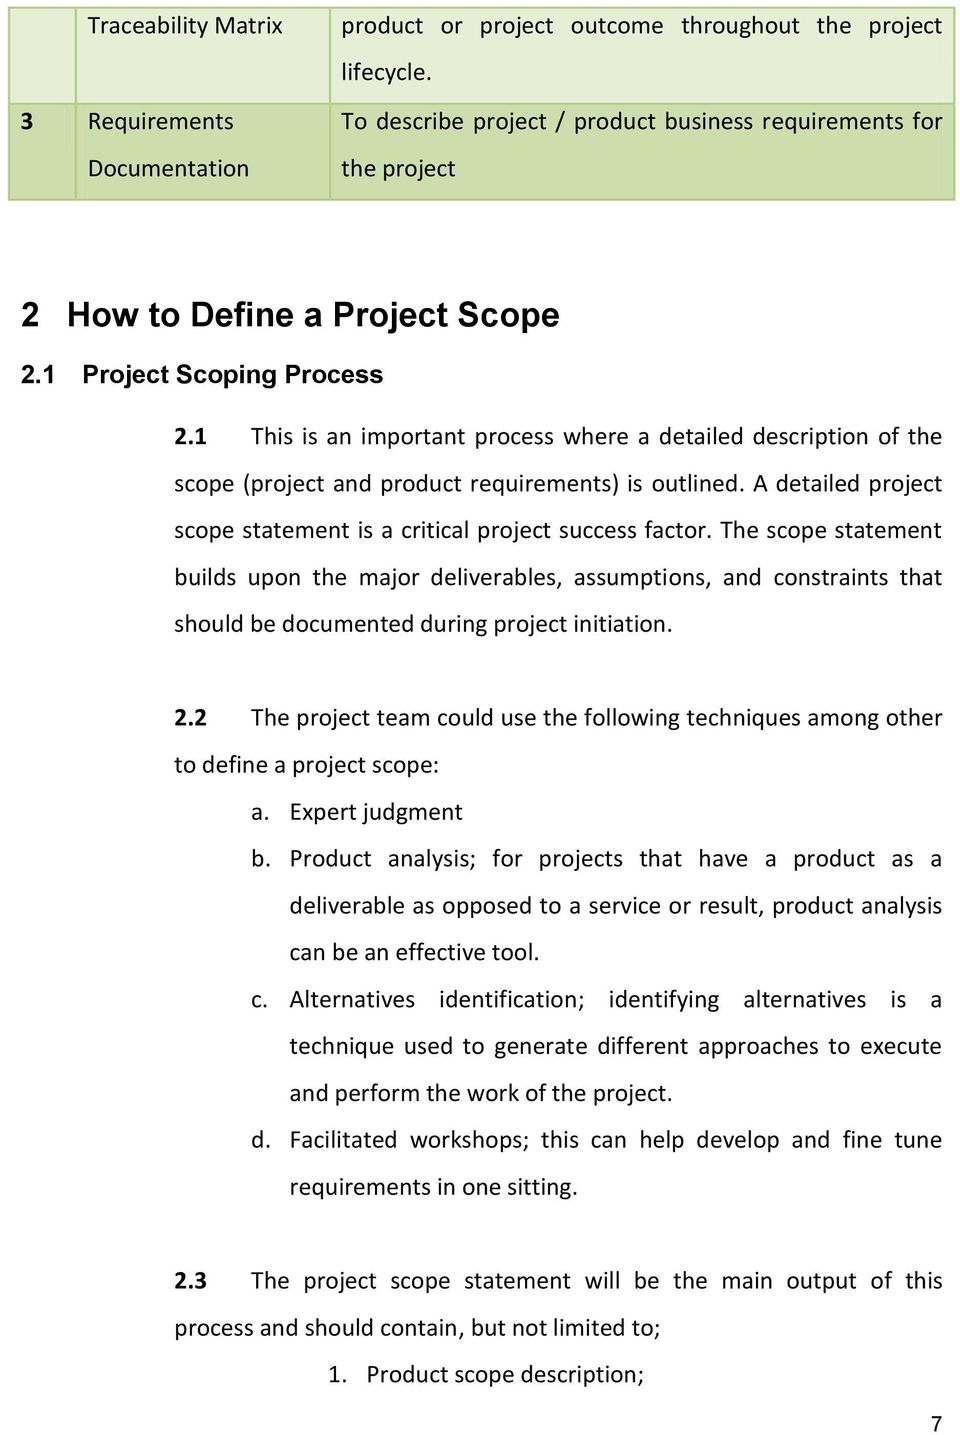 1 This is an important process where a detailed description of the scope (project and product requirements) is outlined. A detailed project scope statement is a critical project success factor.